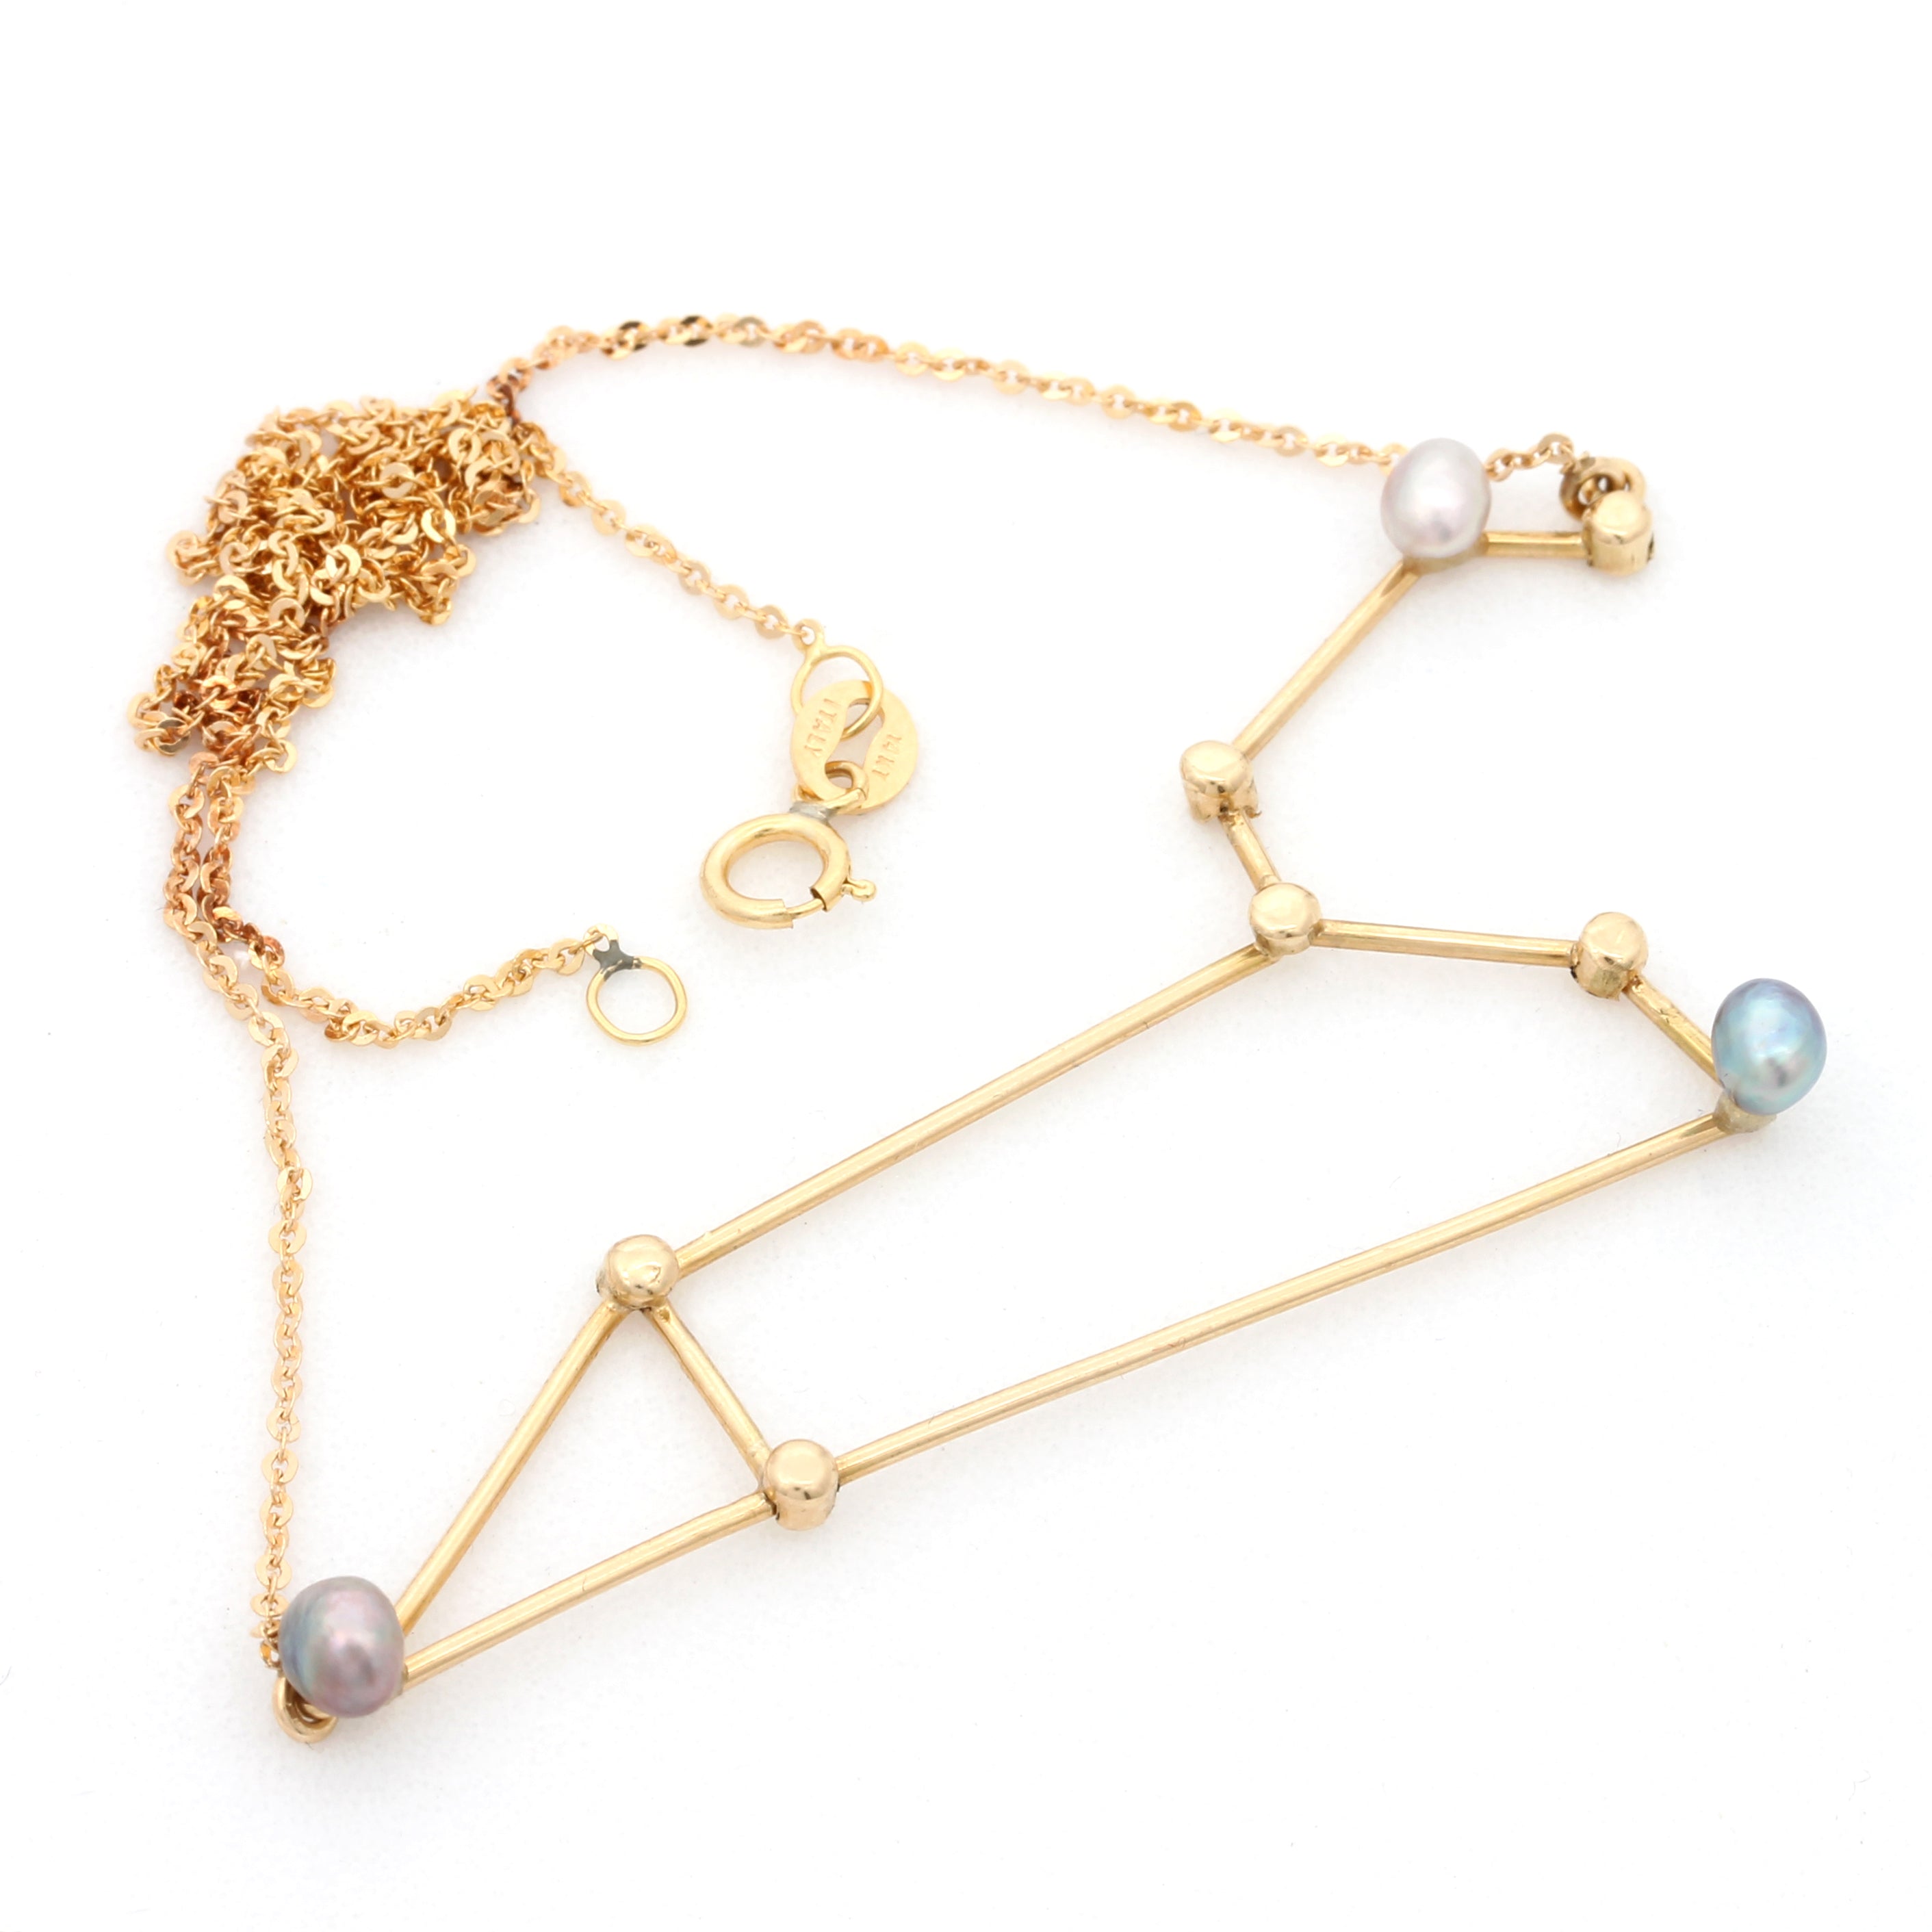 "Leo (July 23th - Aug 22th)" 14K Yellow Gold Pendant and Chain with Cortez Keshi Pearls